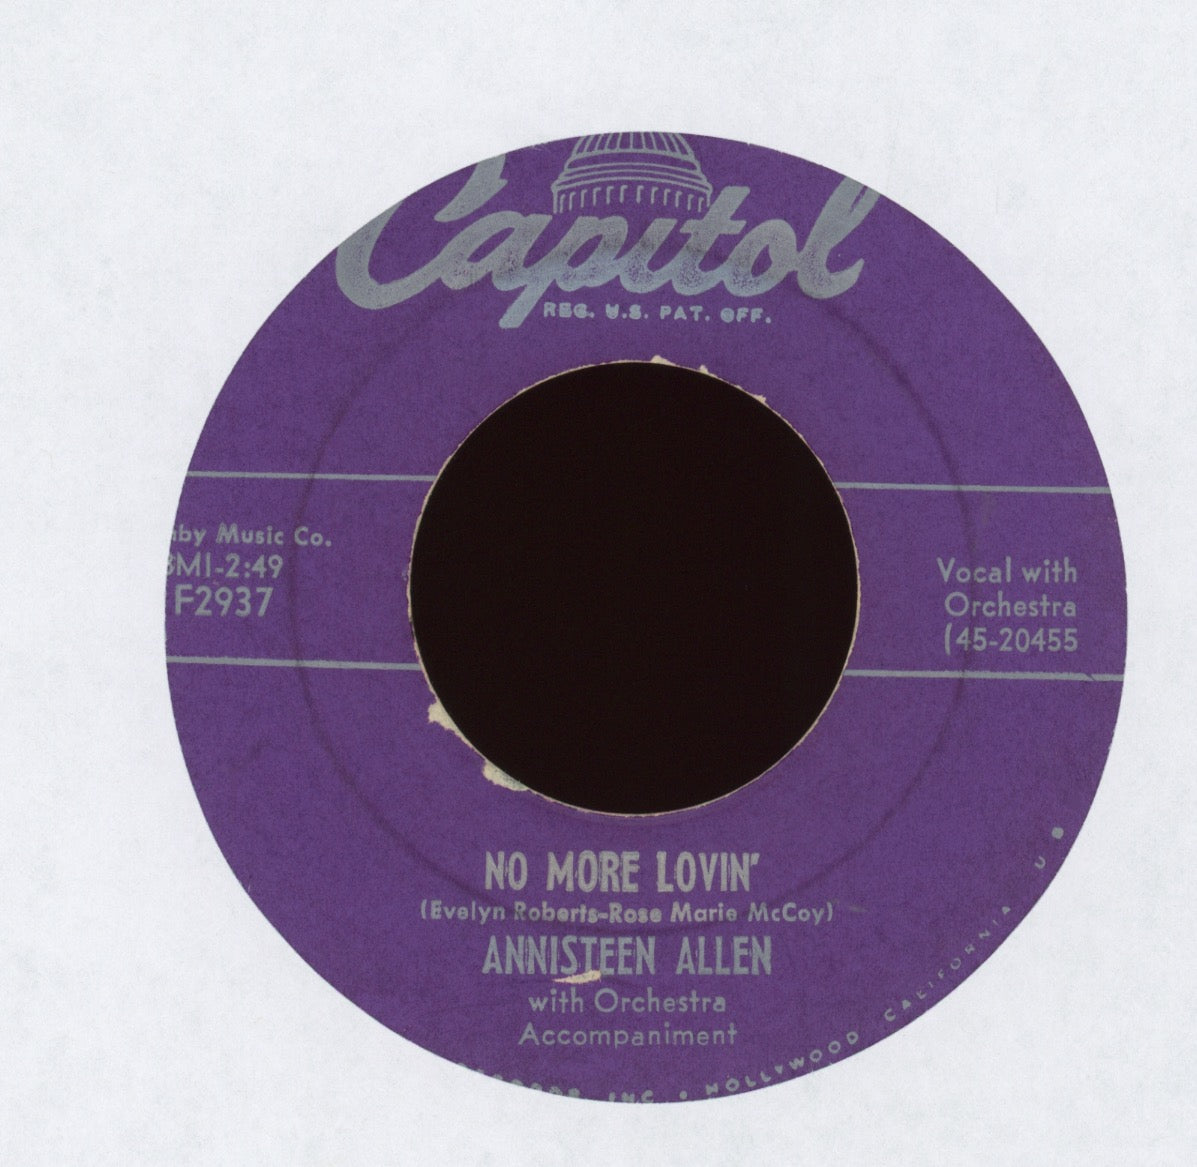 Annisteen Allen - Take A Chance On Me on Capitol R&B Mambo 45